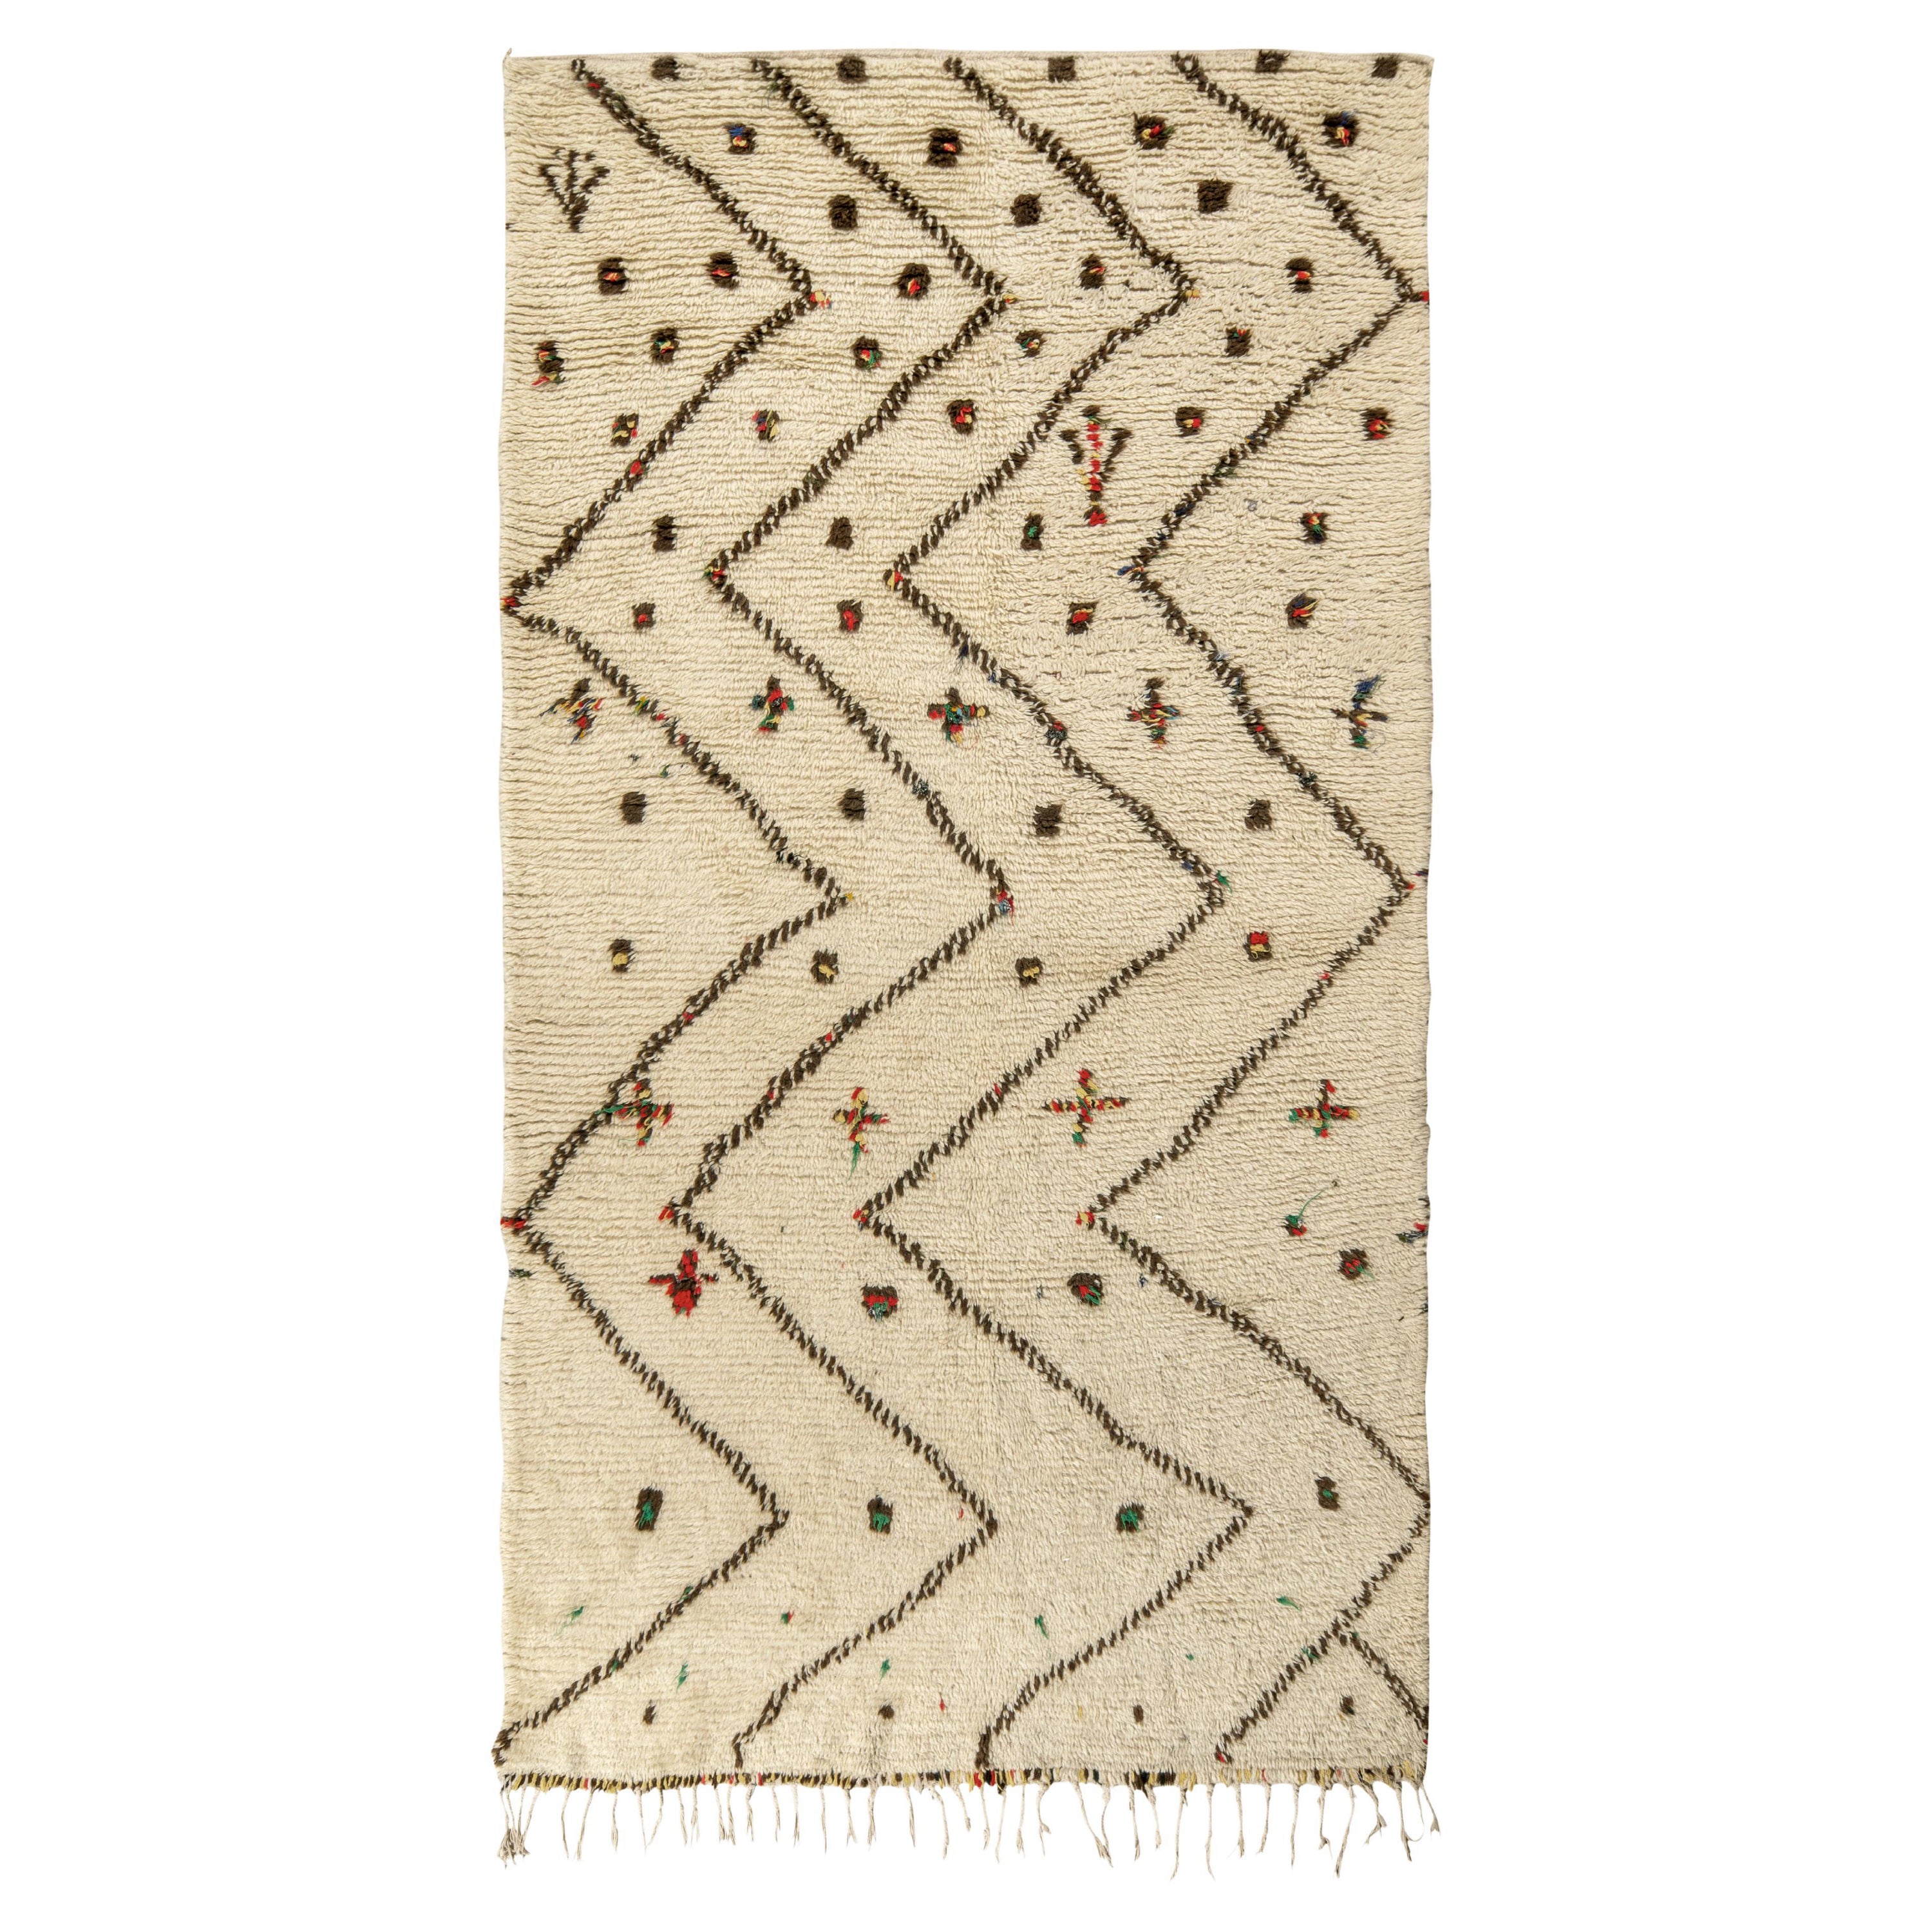 Vintage Moroccan Berber Rug in Beige with Brown Chevrons, from Rug & Kilim For Sale